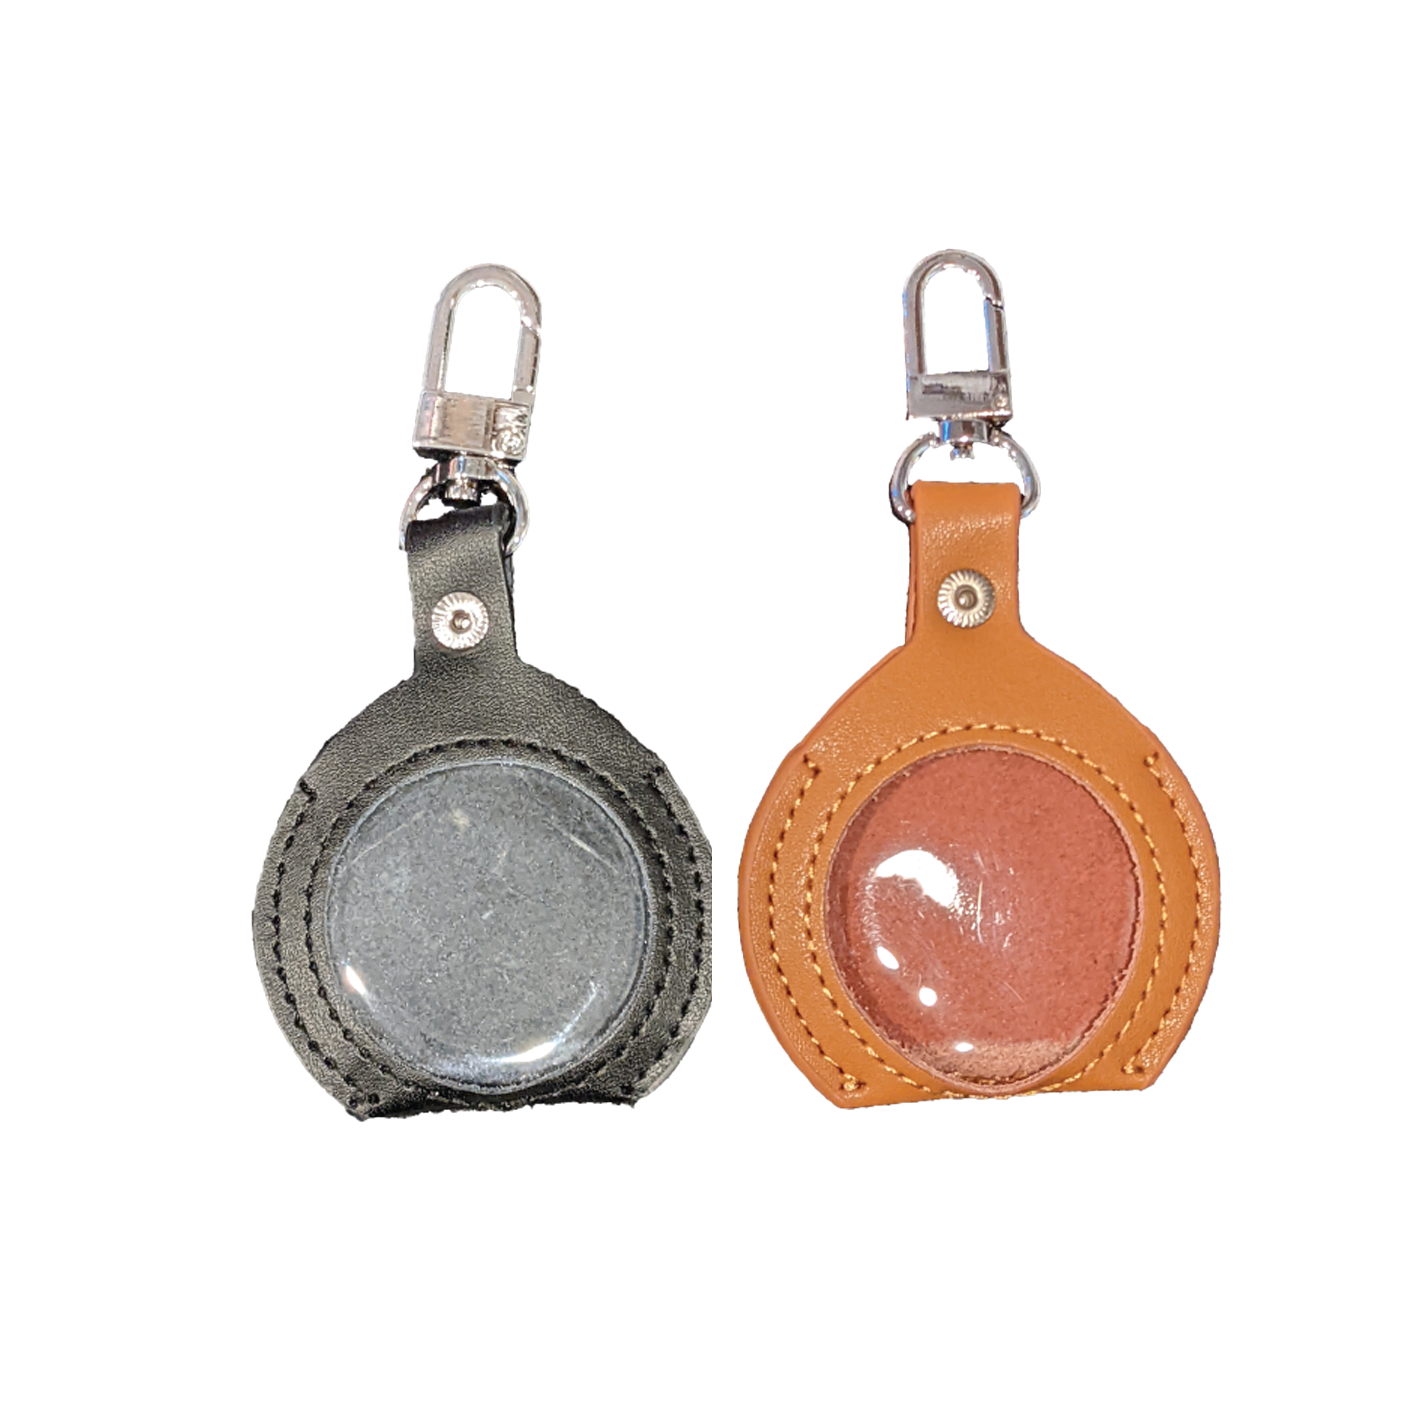 Leather Keychain Holder for any My Recovery Store 40mm medallions.  Available in Black and Brown